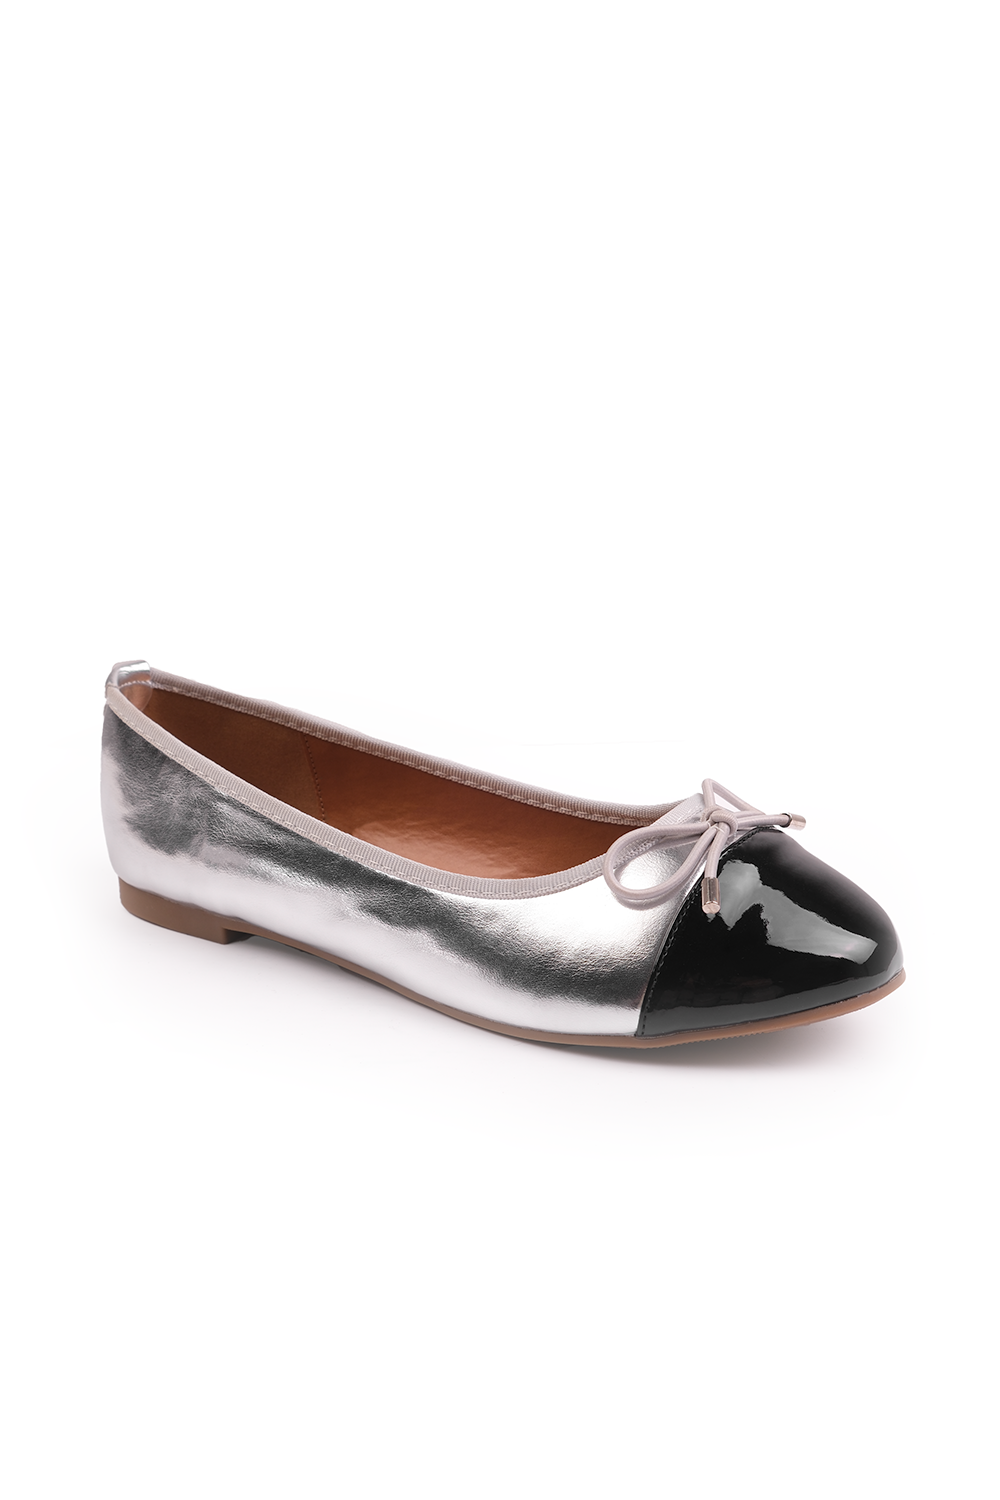 JANICE EXTRA WIDE BALLERINA FLATS WITH FRON BOW DETAIL IN SILVER METALLIC